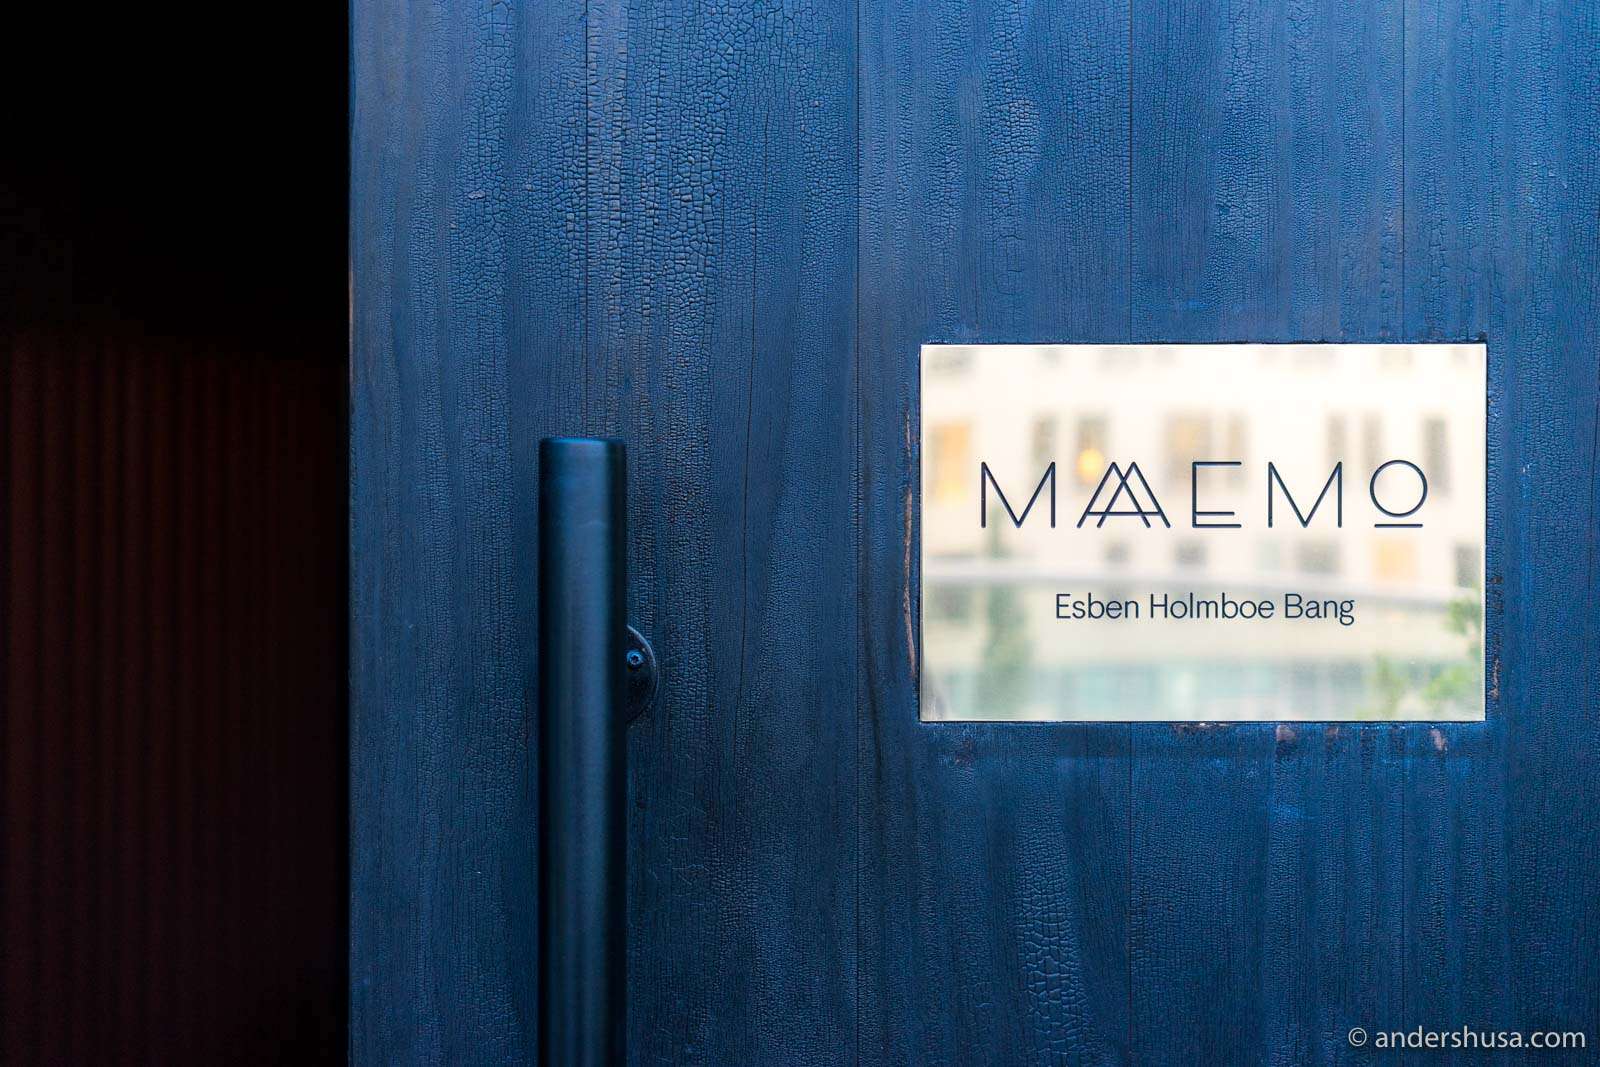 Maaemo is One of the World’s 50 Best Restaurants!